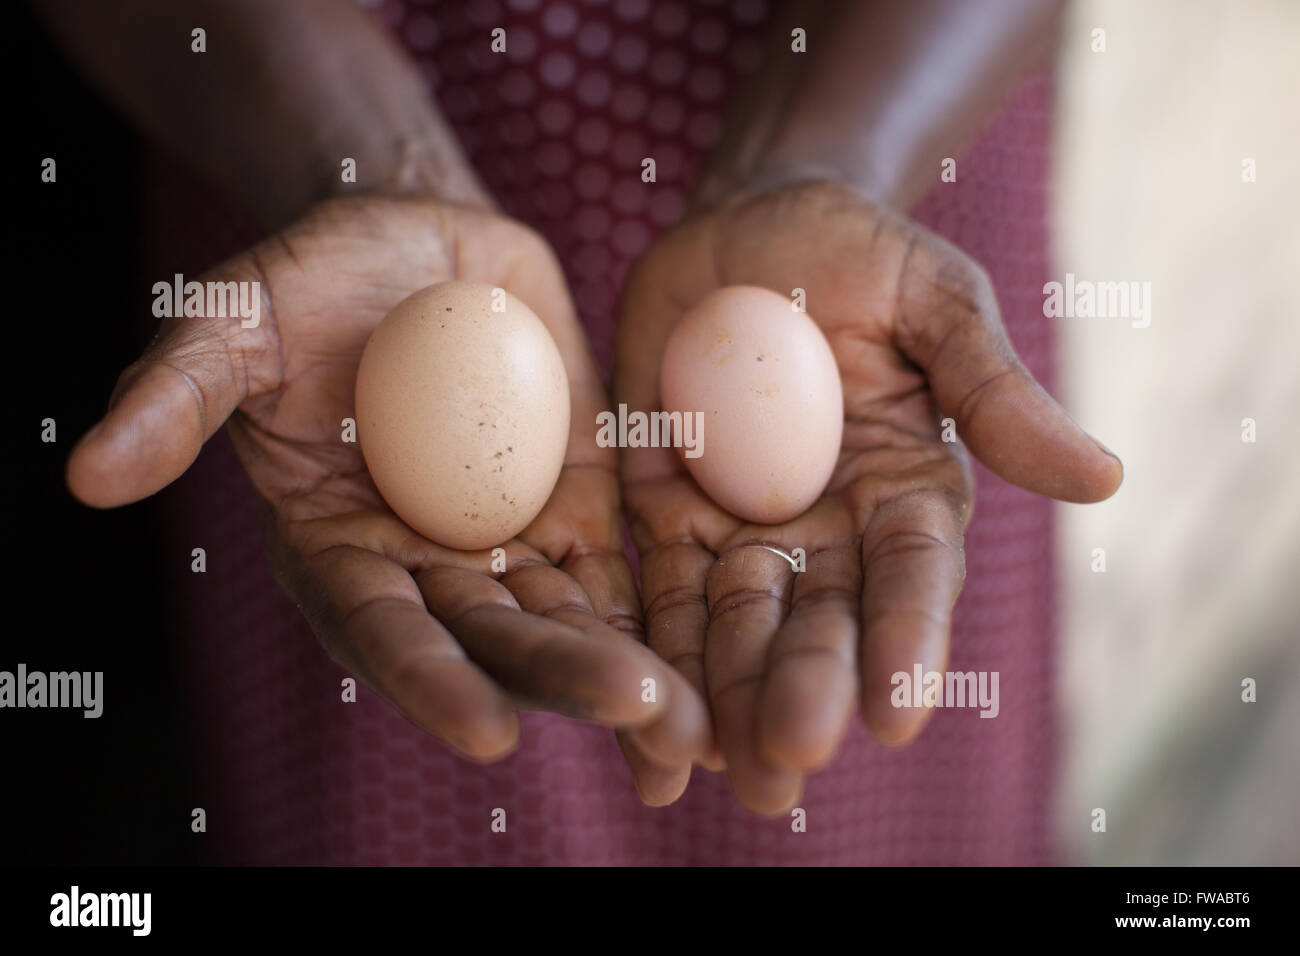 An egg farmer shows the difference in egg size after receiving some training on her farm in Nigeria, Africa Stock Photo